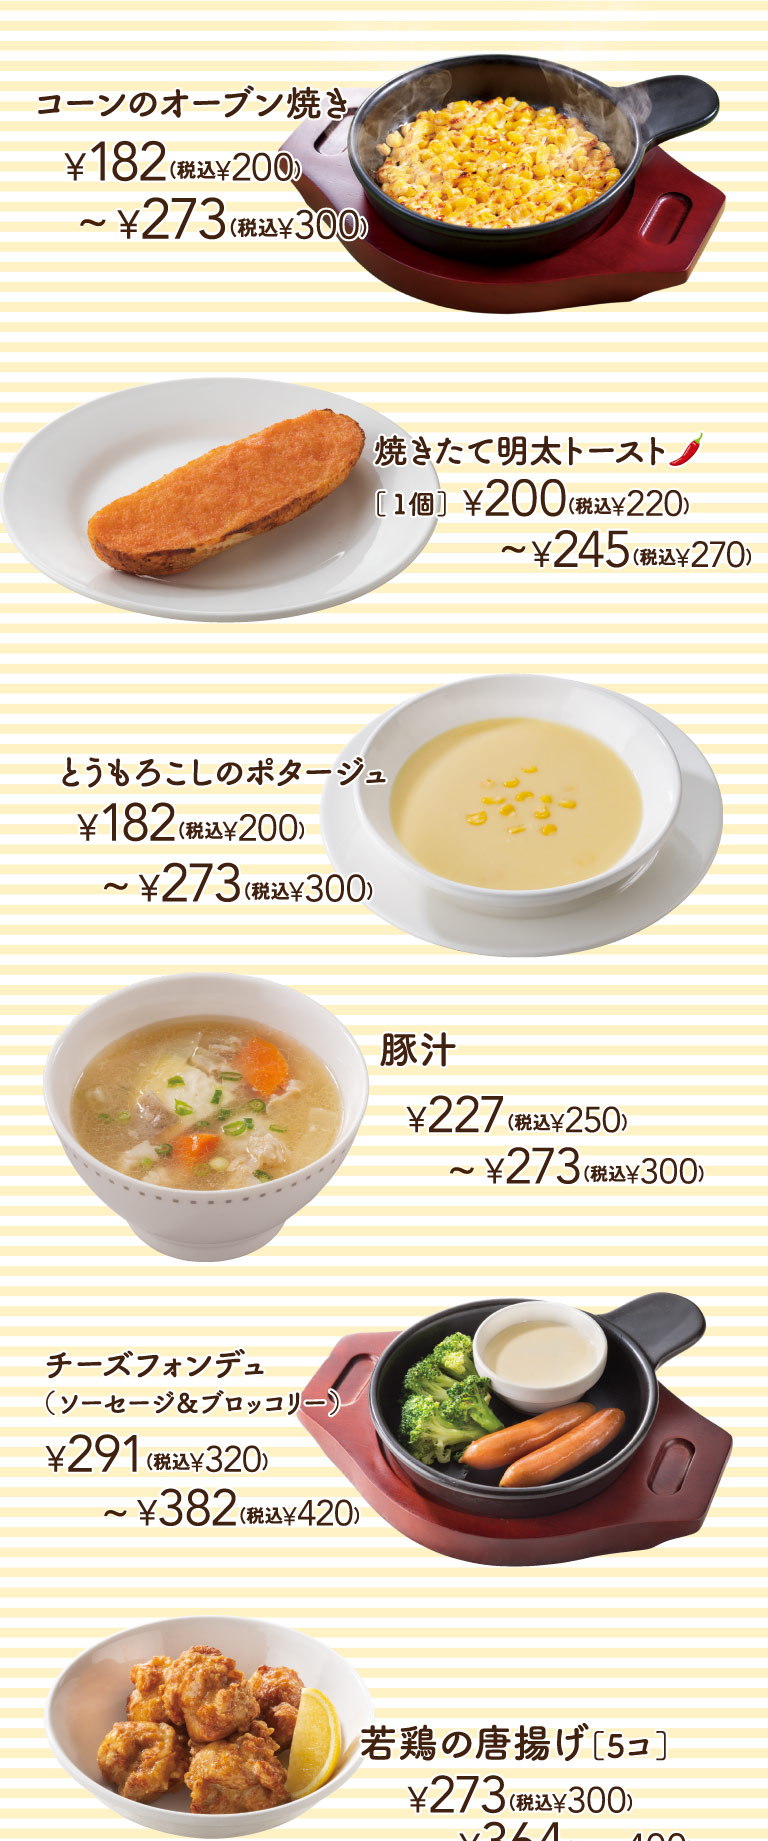 Oven Baked Corn, freshly baked mentaiko toast [1 piece], Corn Potage Soup, Cheese Fondue (Sausage & Broccoli), fried young chicken [5 pieces]